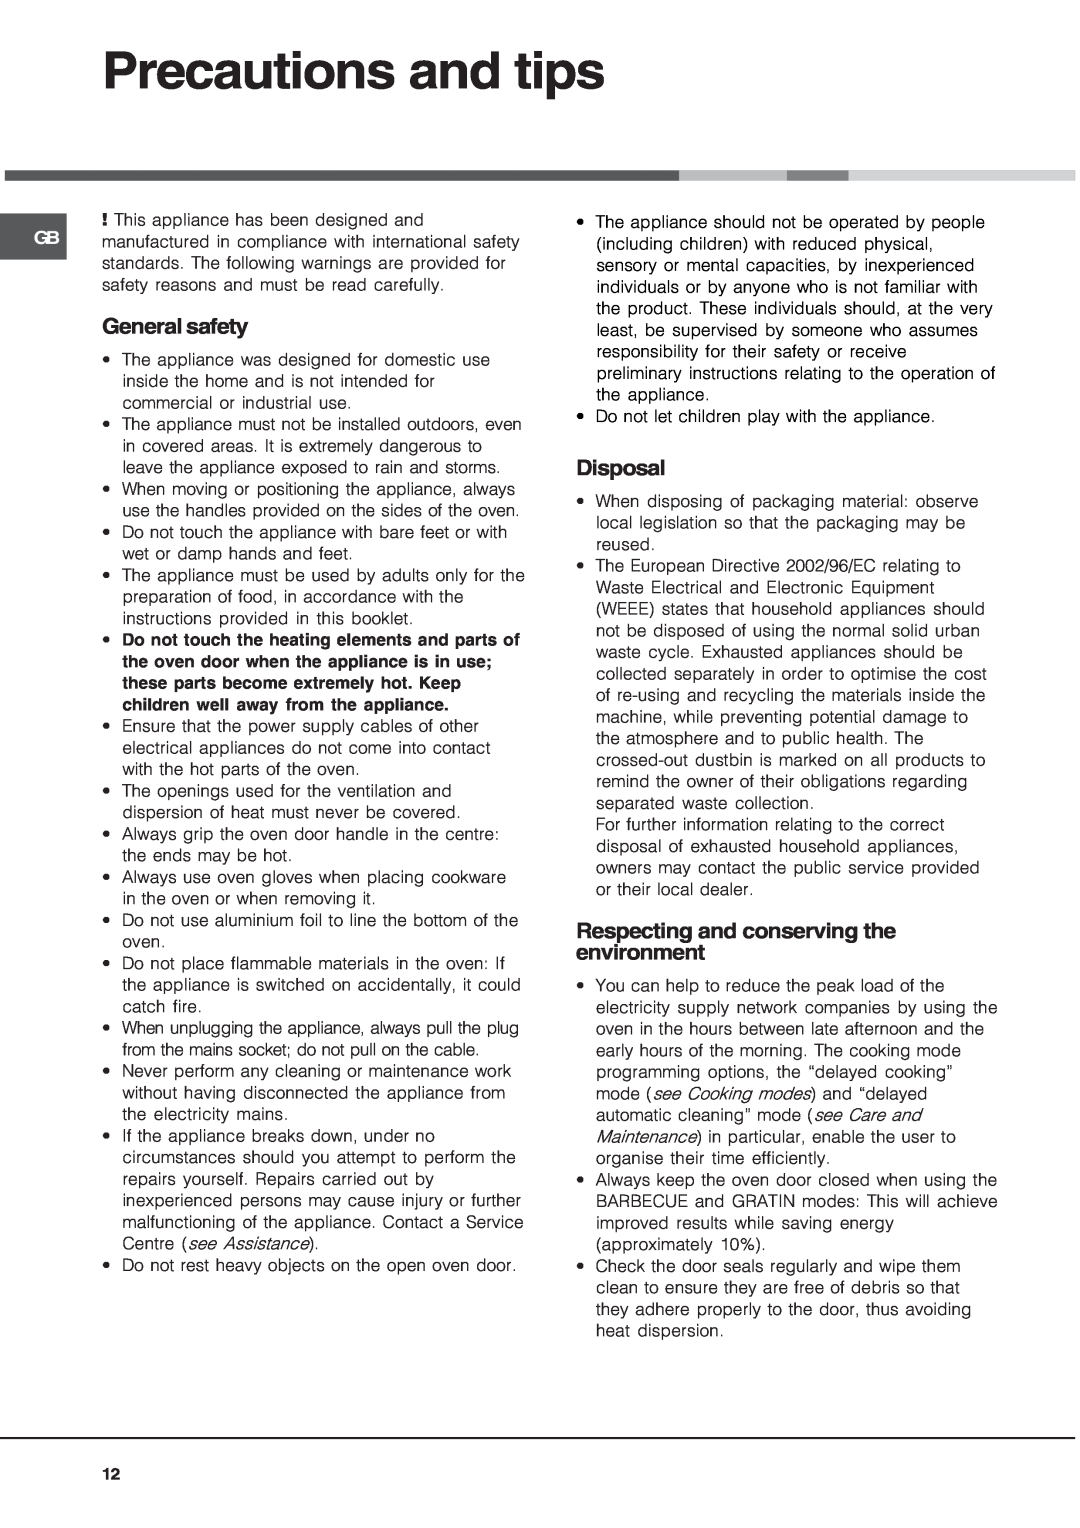 Hotpoint SE48101PGX manual Precautions and tips, General safety, Disposal, Respecting and conserving the environment 